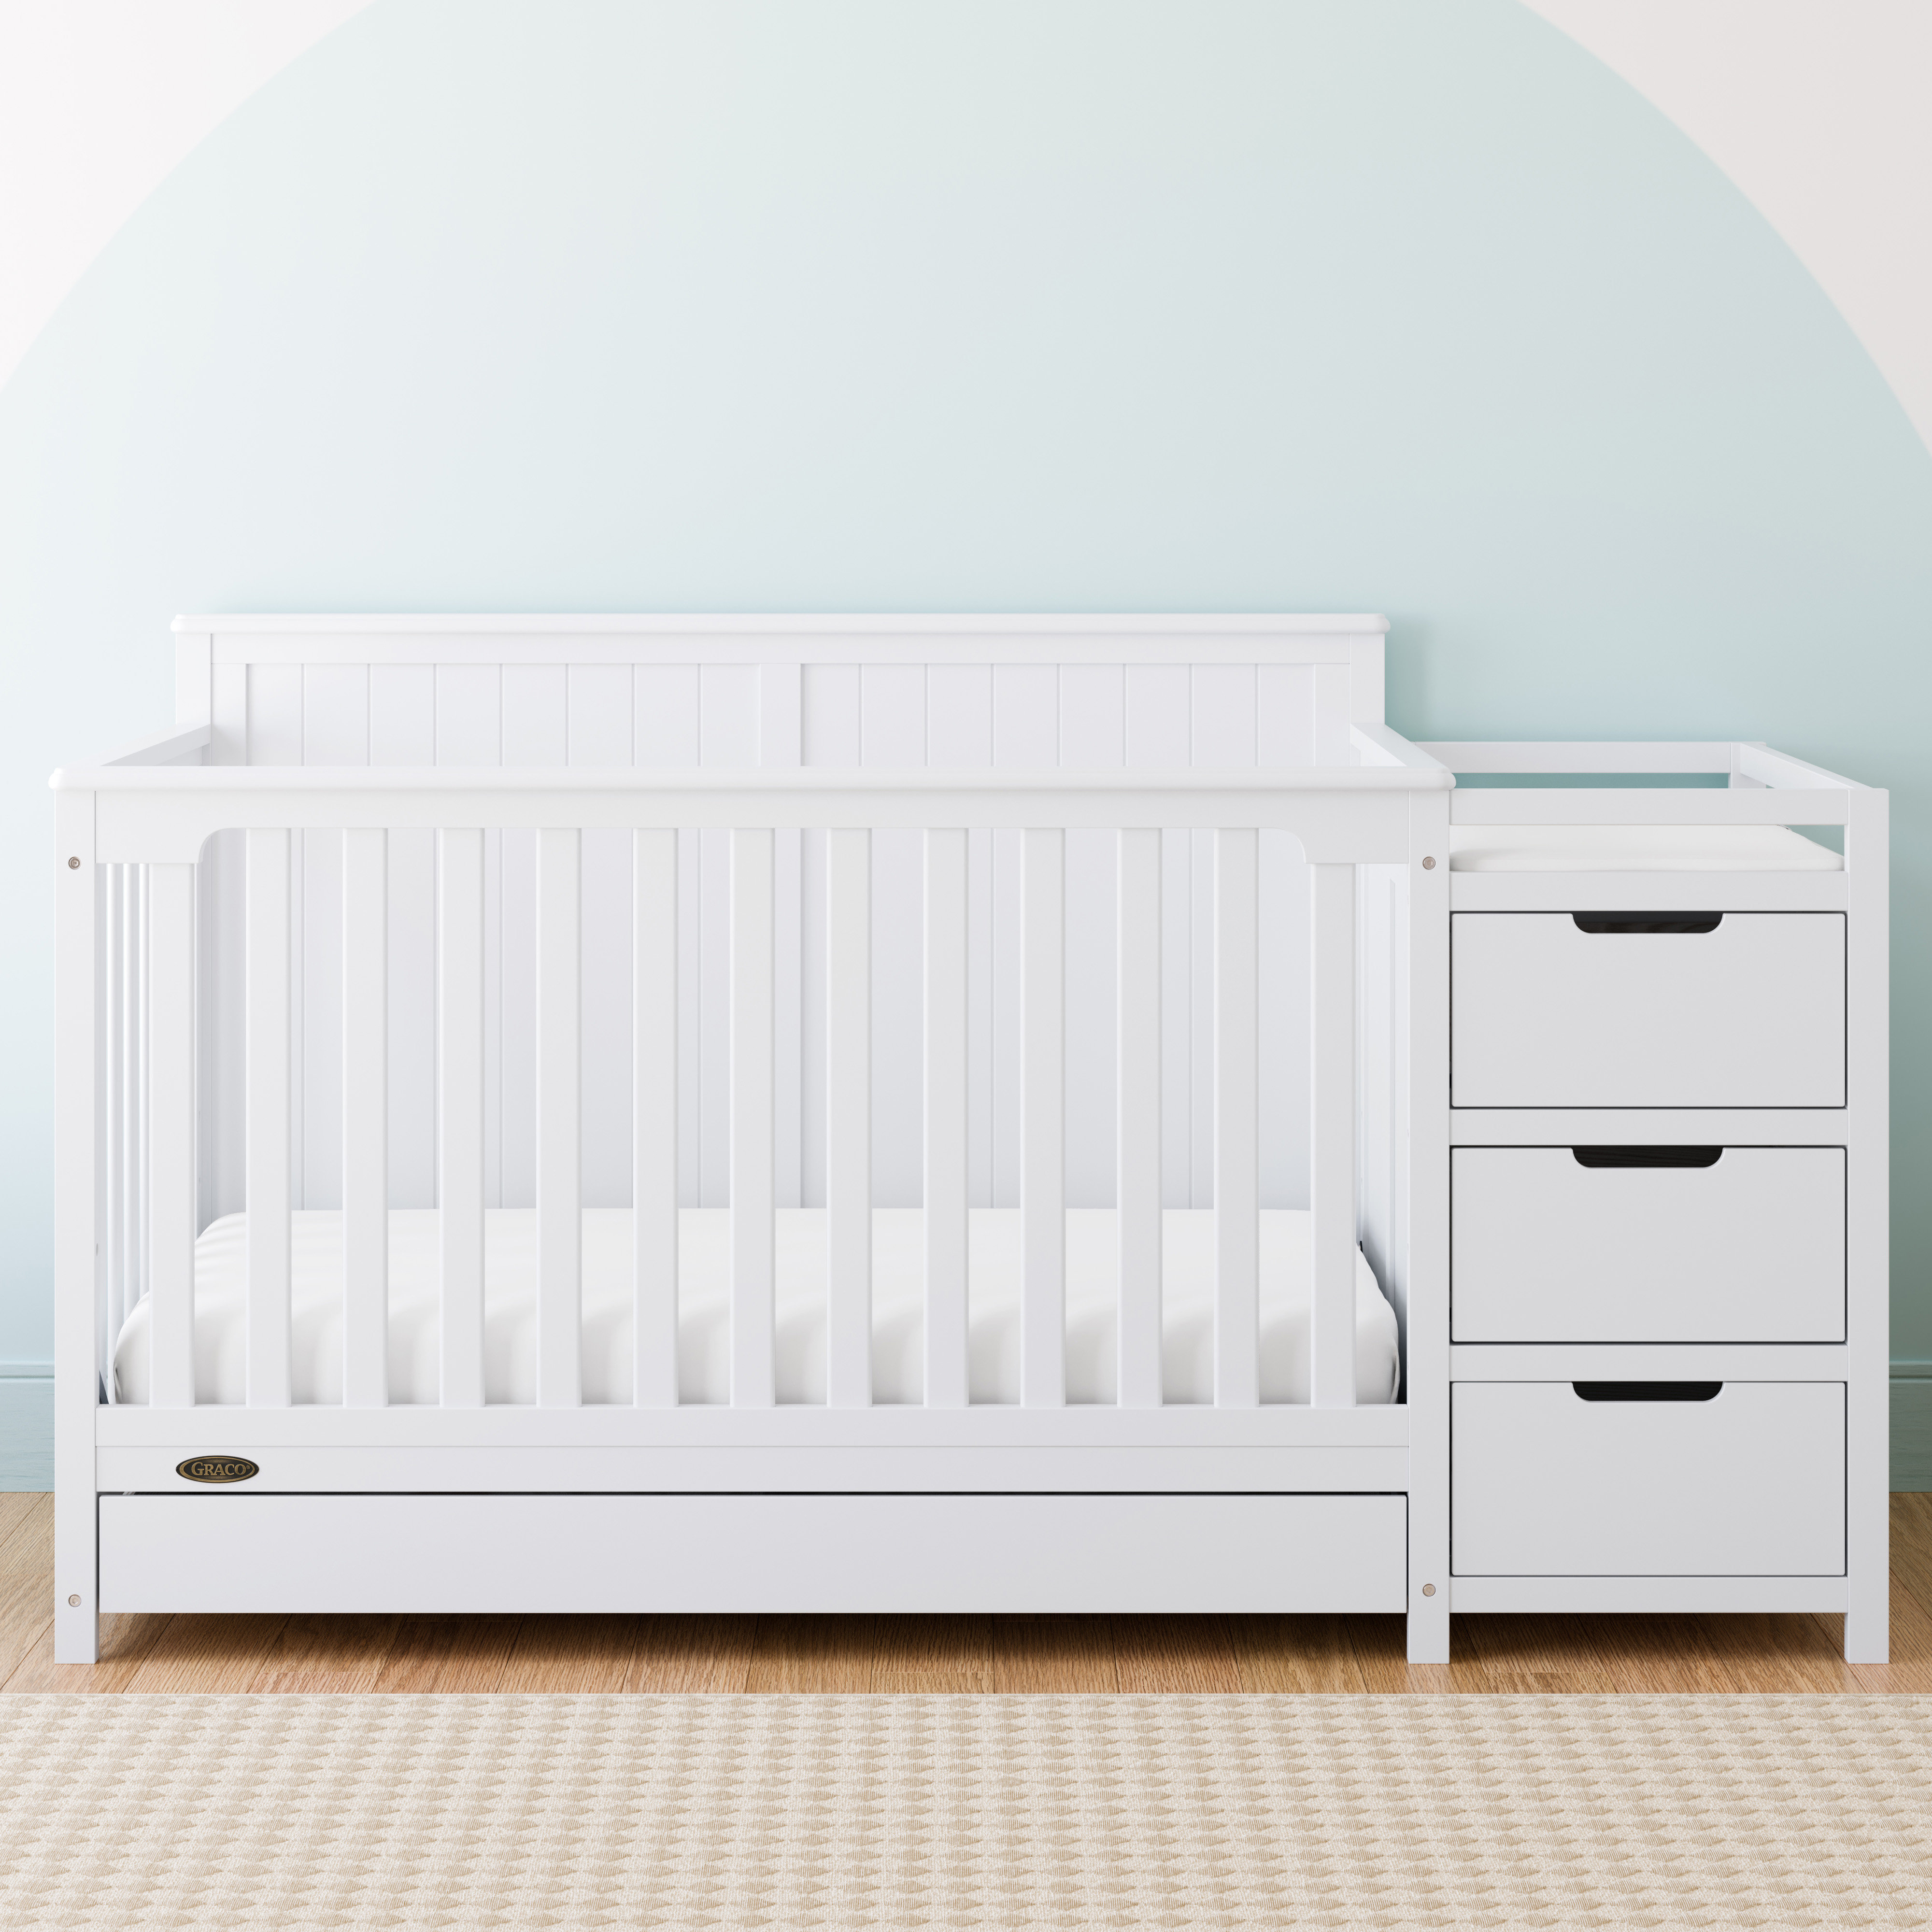 Mattress Not Included Three Position Adjustable Height Mattress Easily Converts to Toddler Bed Day Bed or Full Bed Espresso Graco Hadley 4 in 1 Convertible Crib Changer with Drawer 